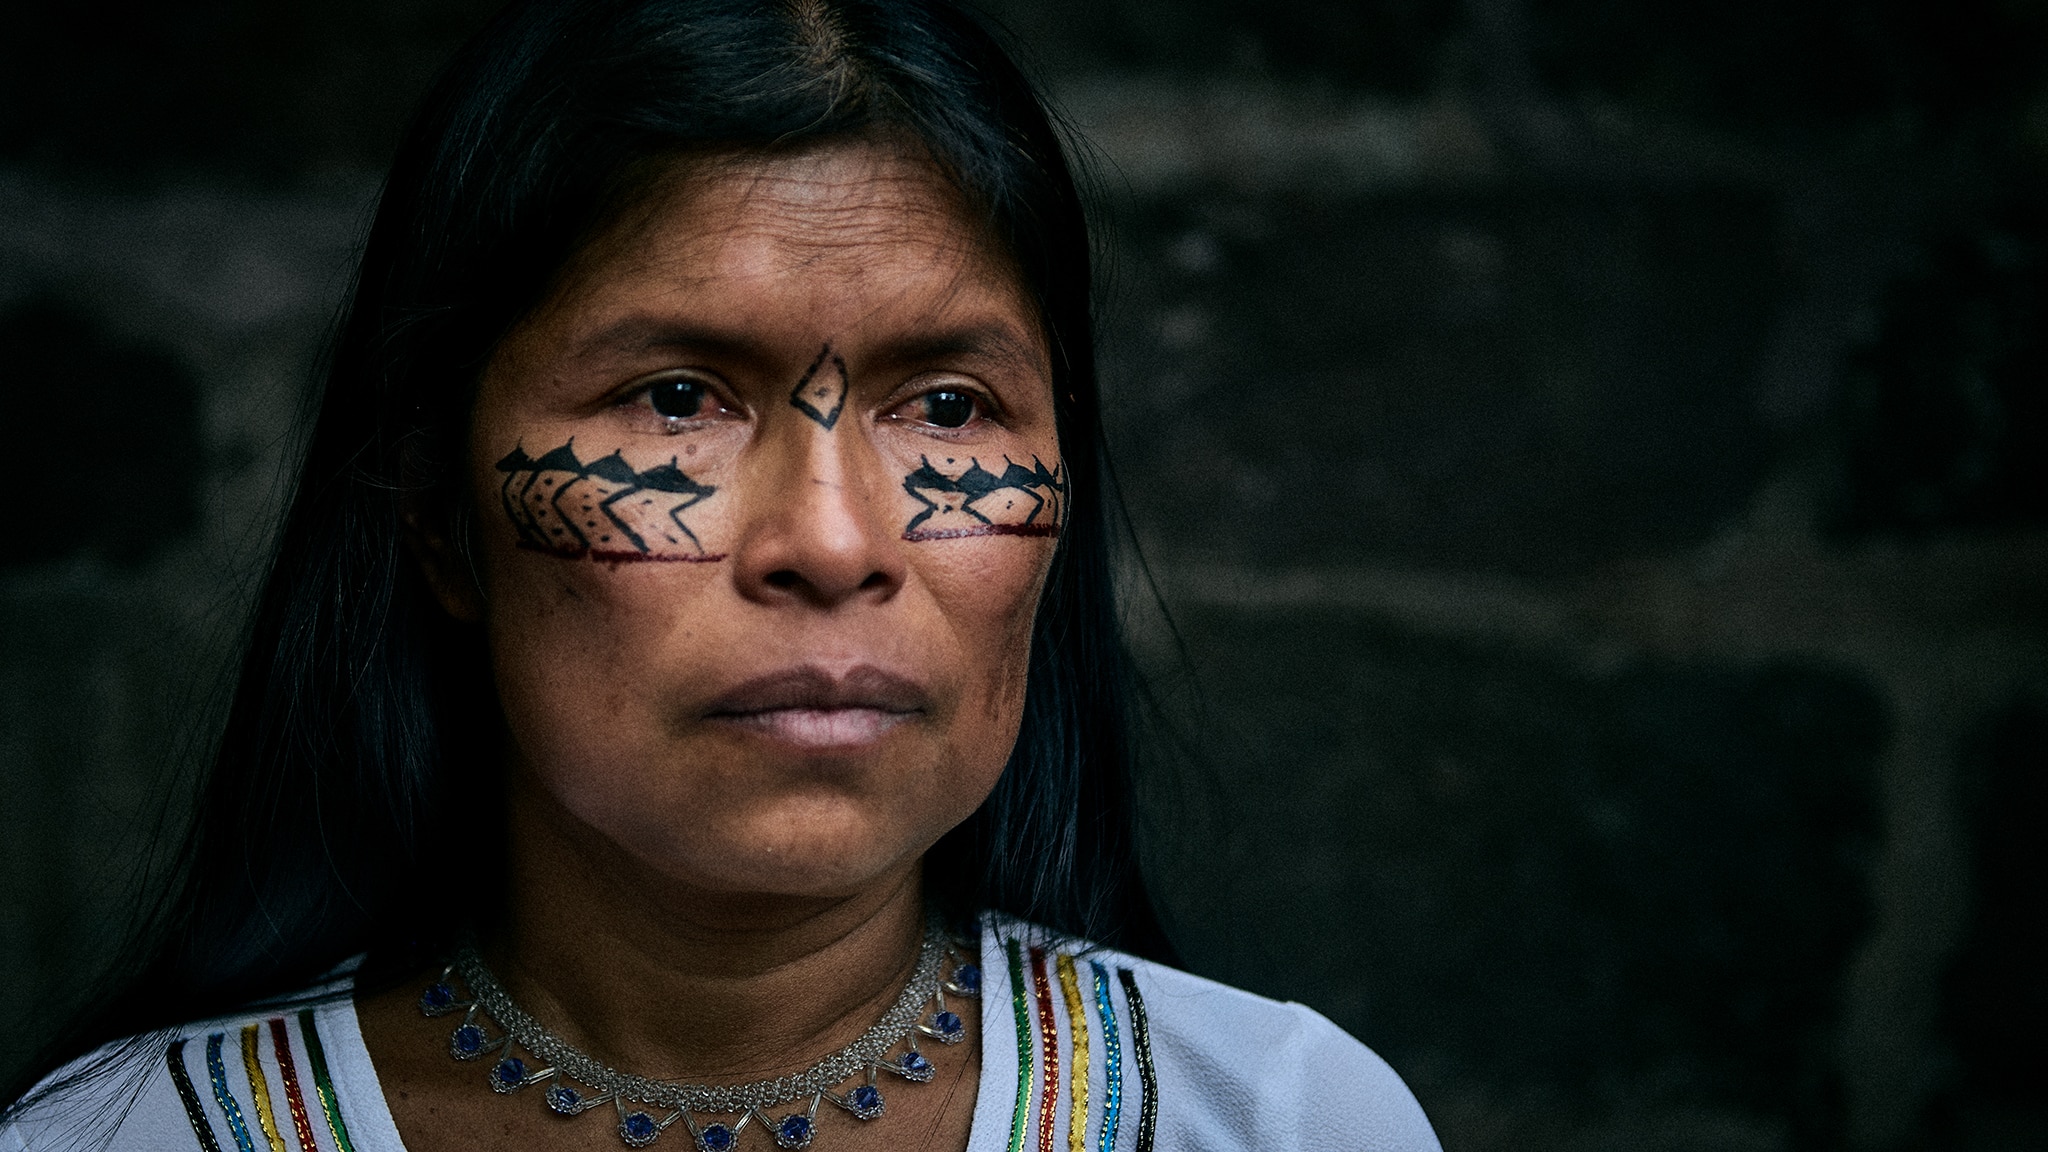 A close-up image of Noemi Gualinga. She is an Indigenous woman with painted markings on her face. She wears a necklace made of metal and blue stones. Her shirt is white with green, red, yellow, blue, and black stripes around the neckline. 